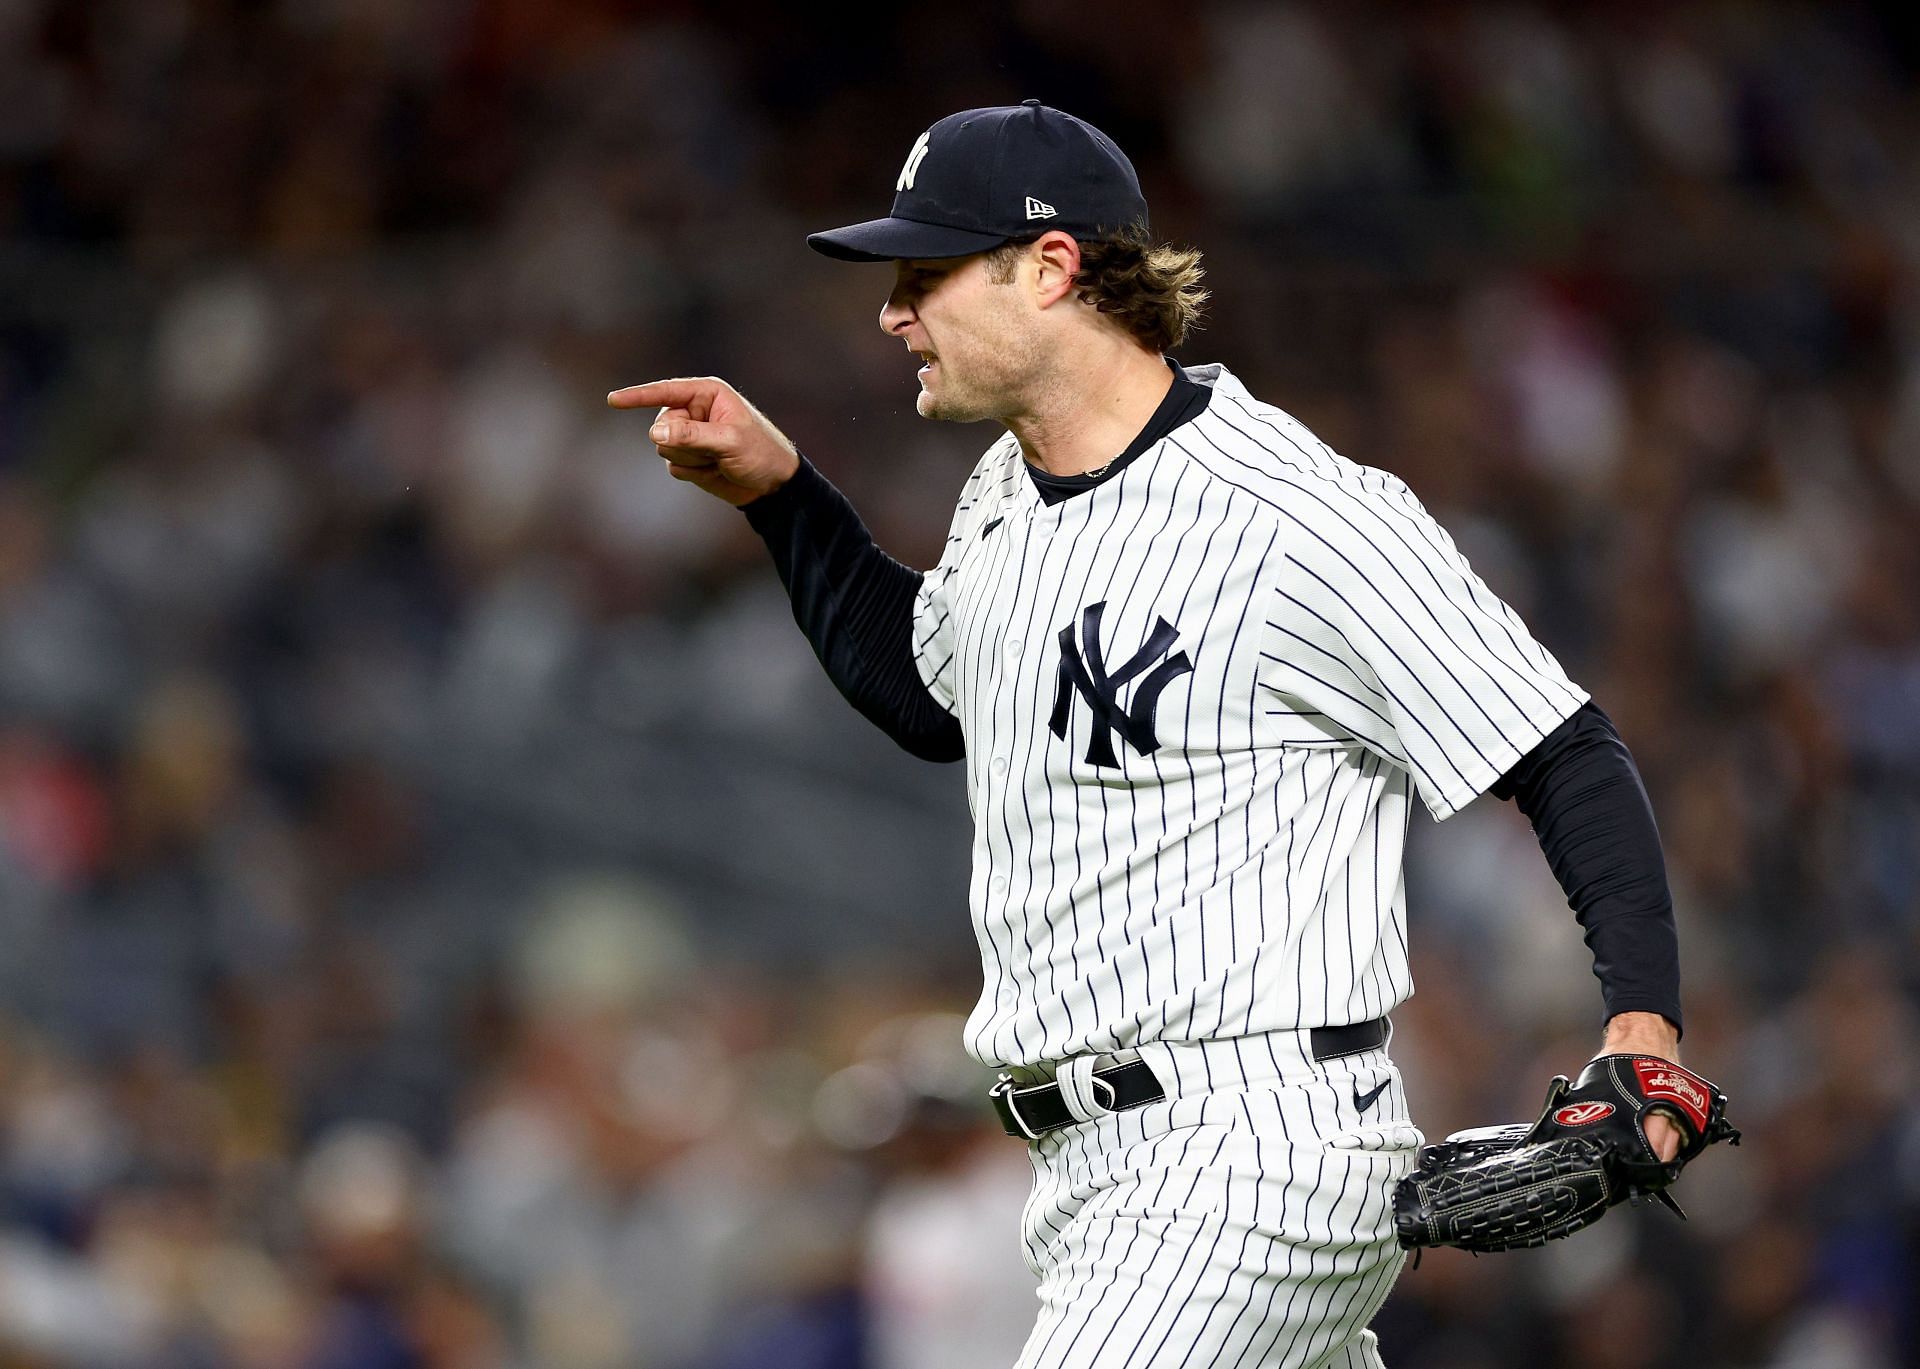 A reminder that Yankees ace Gerrit Cole absolutely demolishes bananas